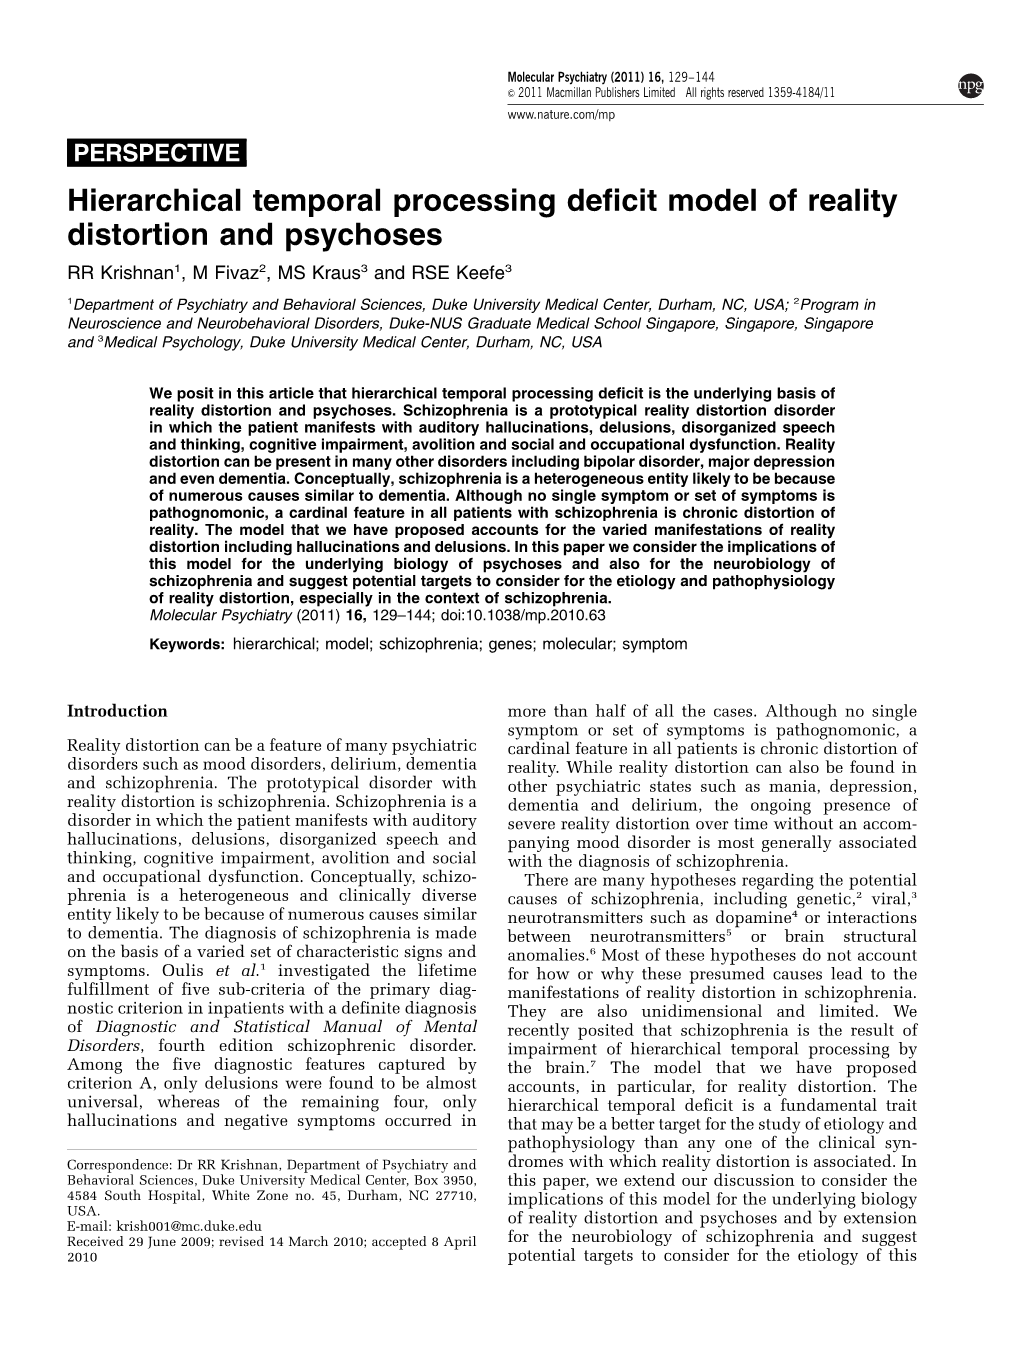 Hierarchical Temporal Processing Deficit Model of Reality Distortion And